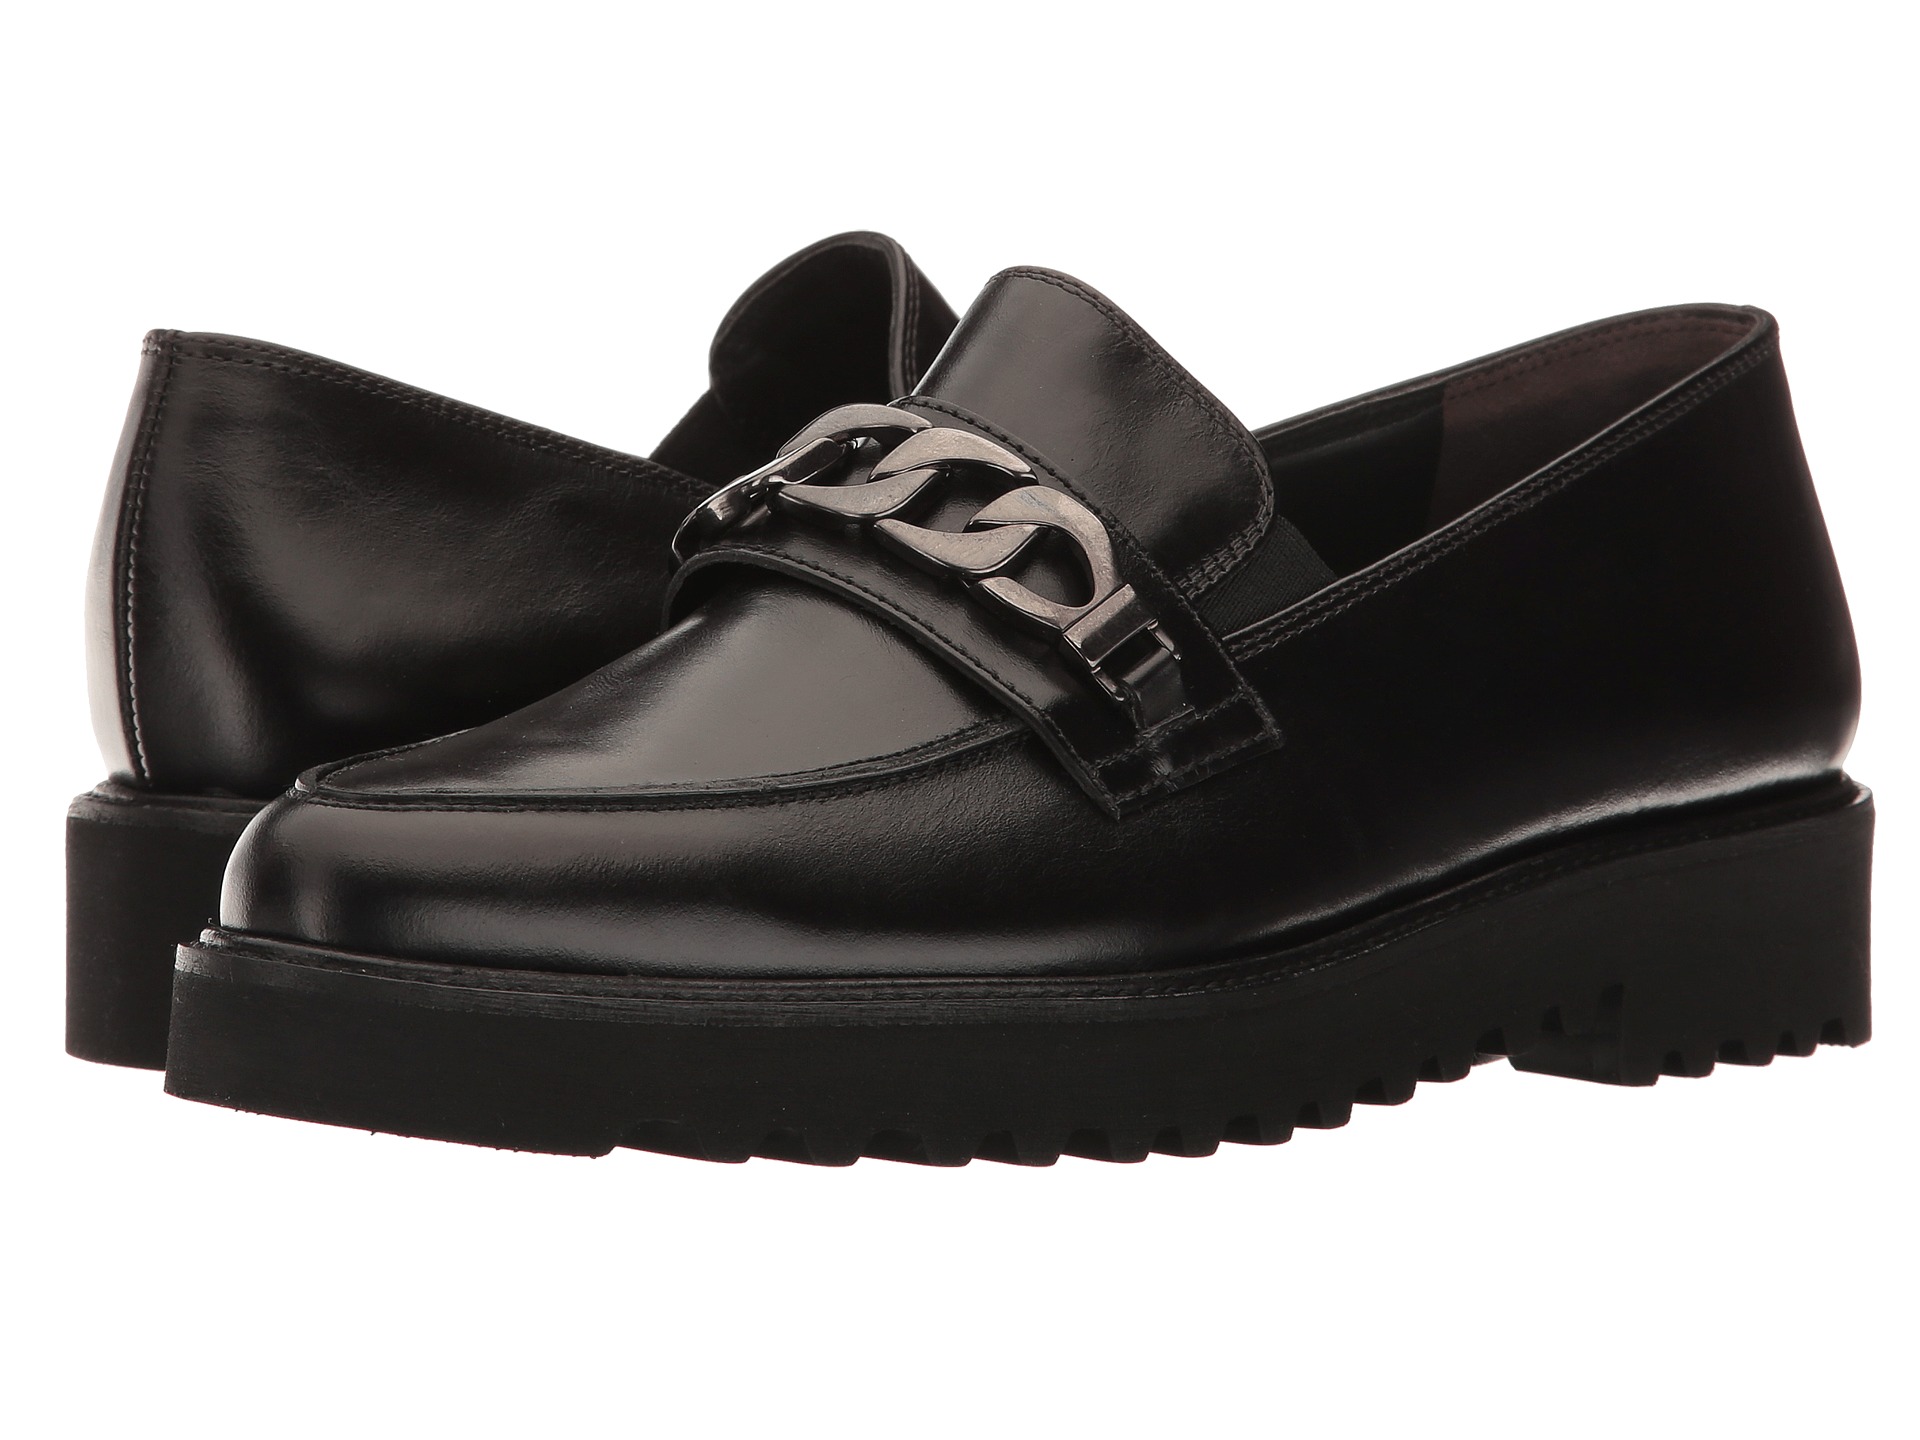 Paul Green Maria Loafer Black Leather - Zappos.com Free Shipping BOTH Ways